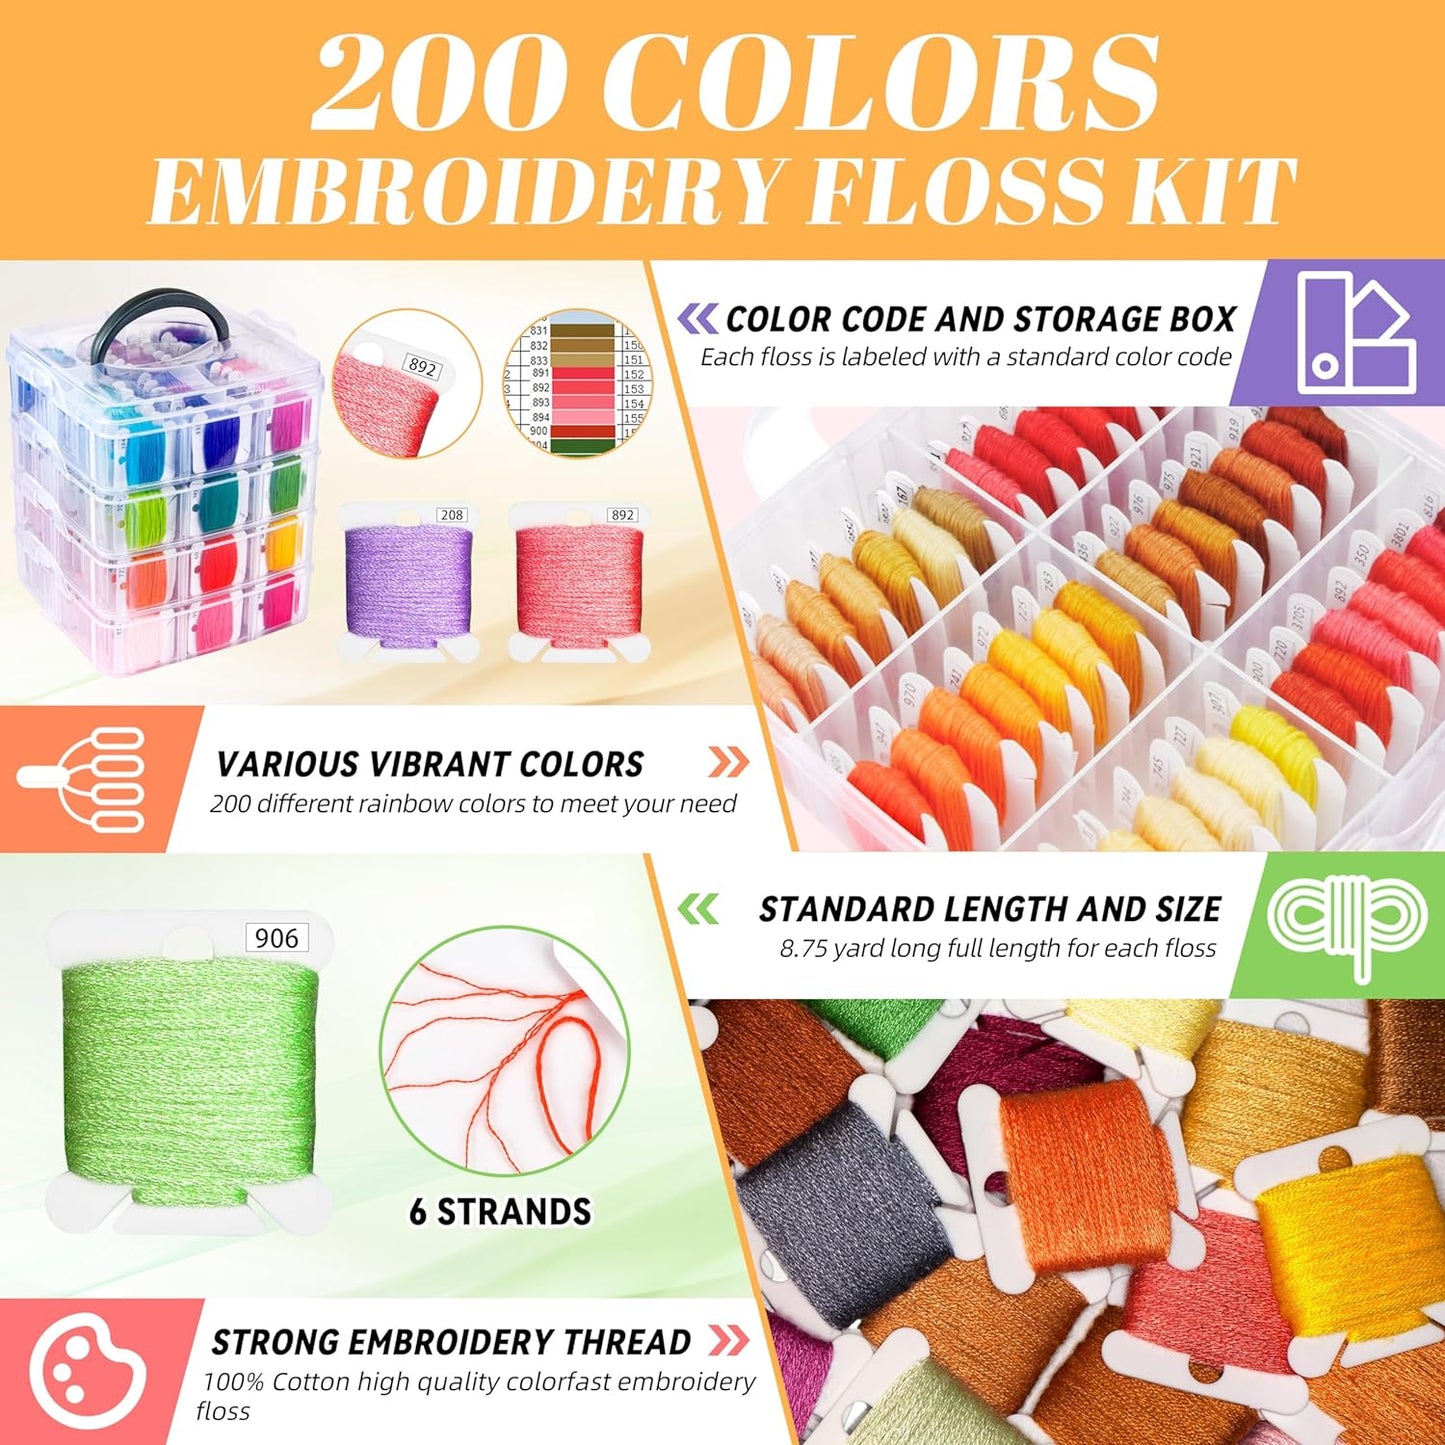 262 Pack Embroidery Thread Floss Kit Including 200 Colors 8 M/Pcs Cross Stitch Sewing Thread with Floss Bins and 62 Pcs Cross Stitch Tool,4-Tier Transparent Storage Box